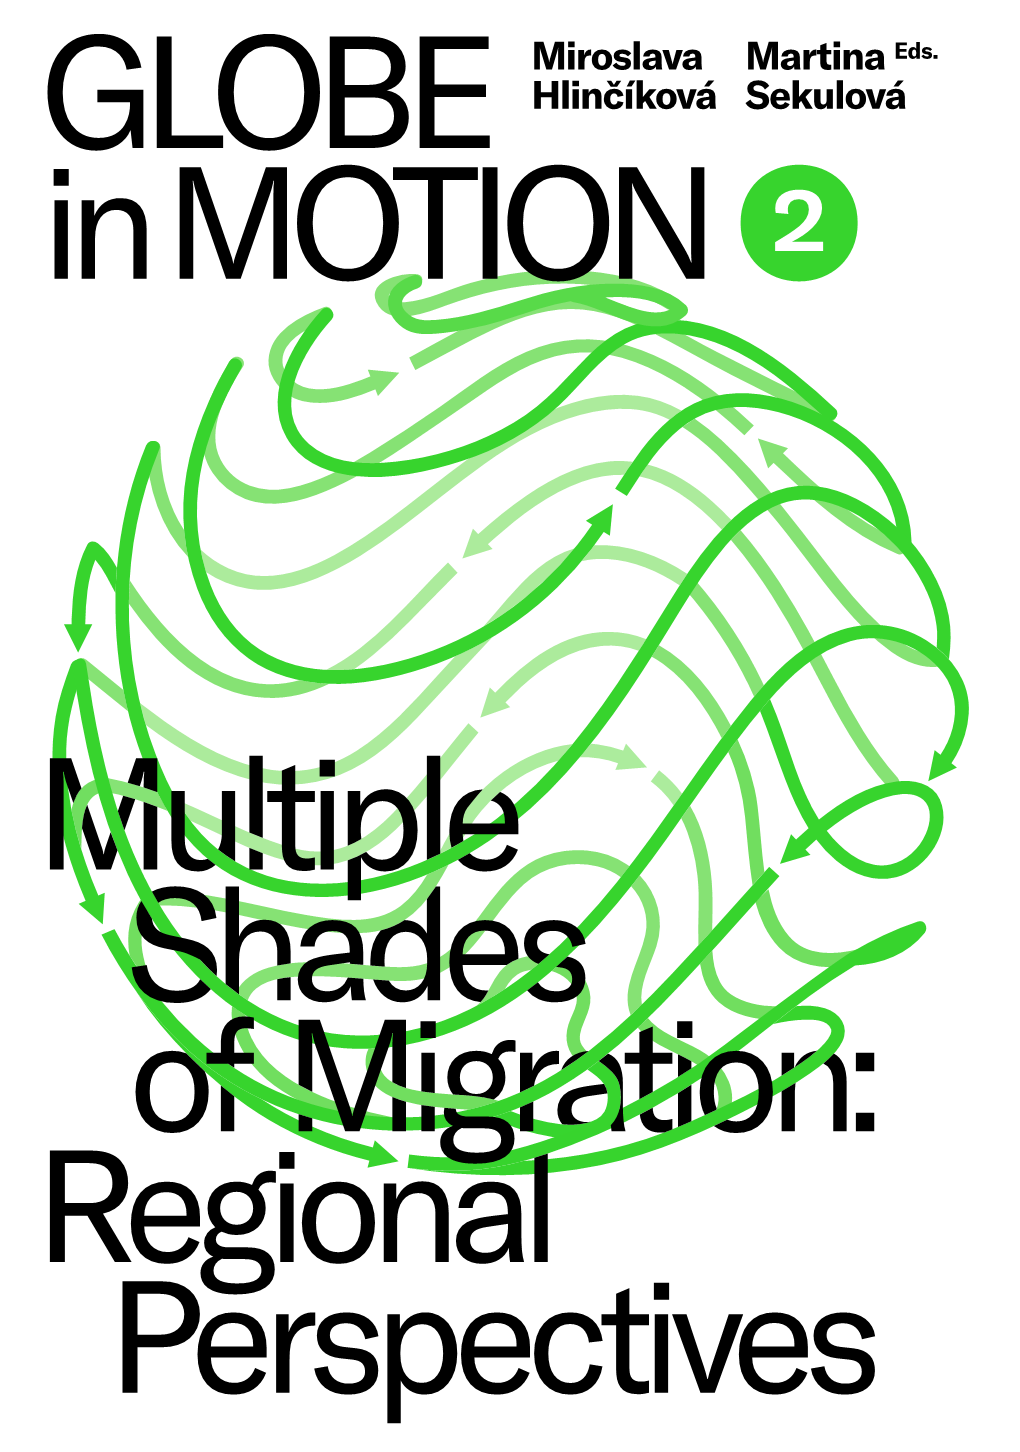 Multiple Shades of Migration: Regional to Publish Them As a Separate Volume the Needs of Migrants